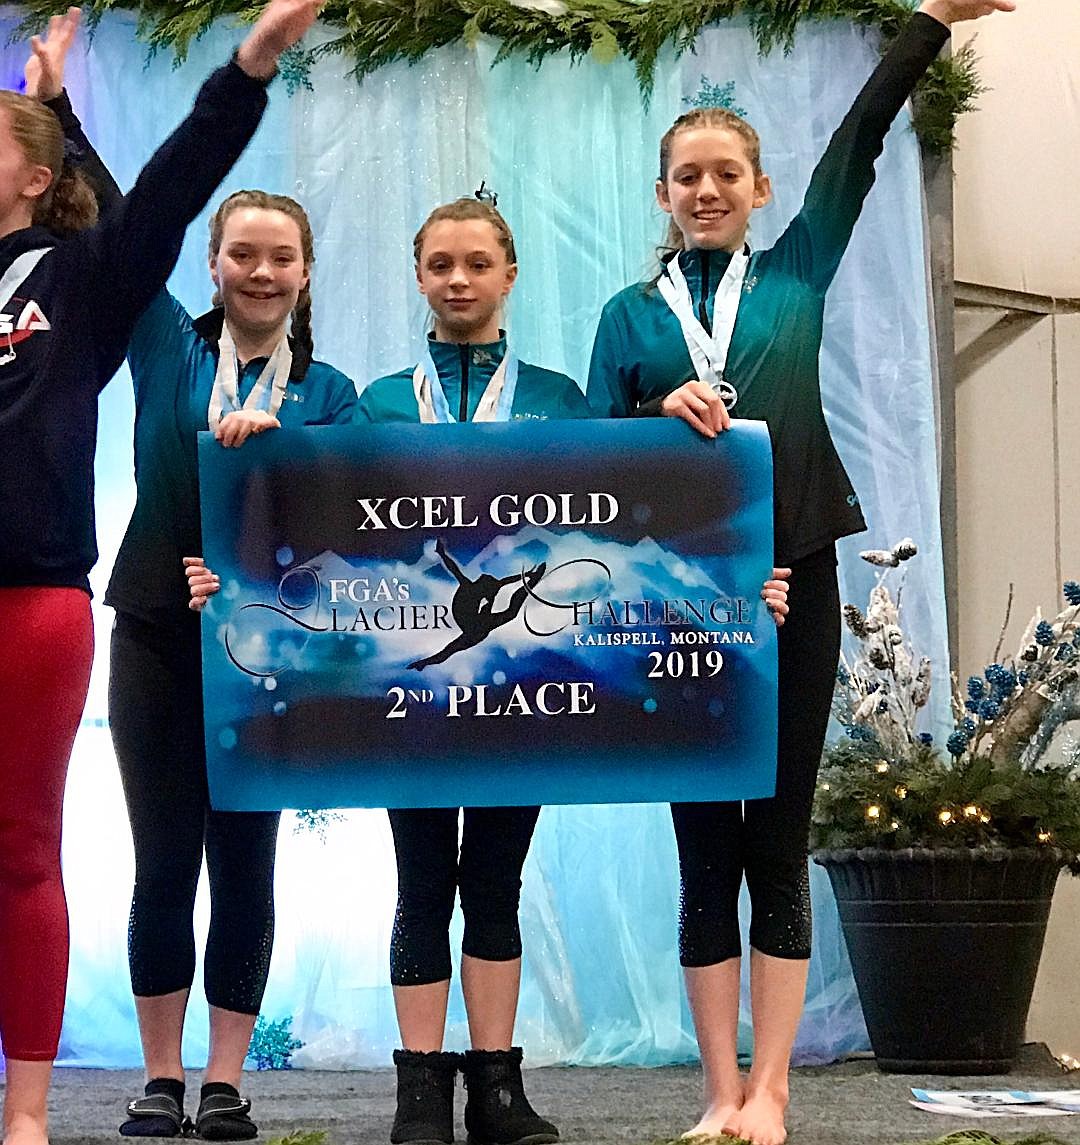 Courtesy photo
Technique Gymnastics Xcel Golds took 2nd Place Team at the Glacier Challenge in Kalispell, Mont. From left are Elyse Hemenway, Mikalah Shouse and Kaitlynn Butler.